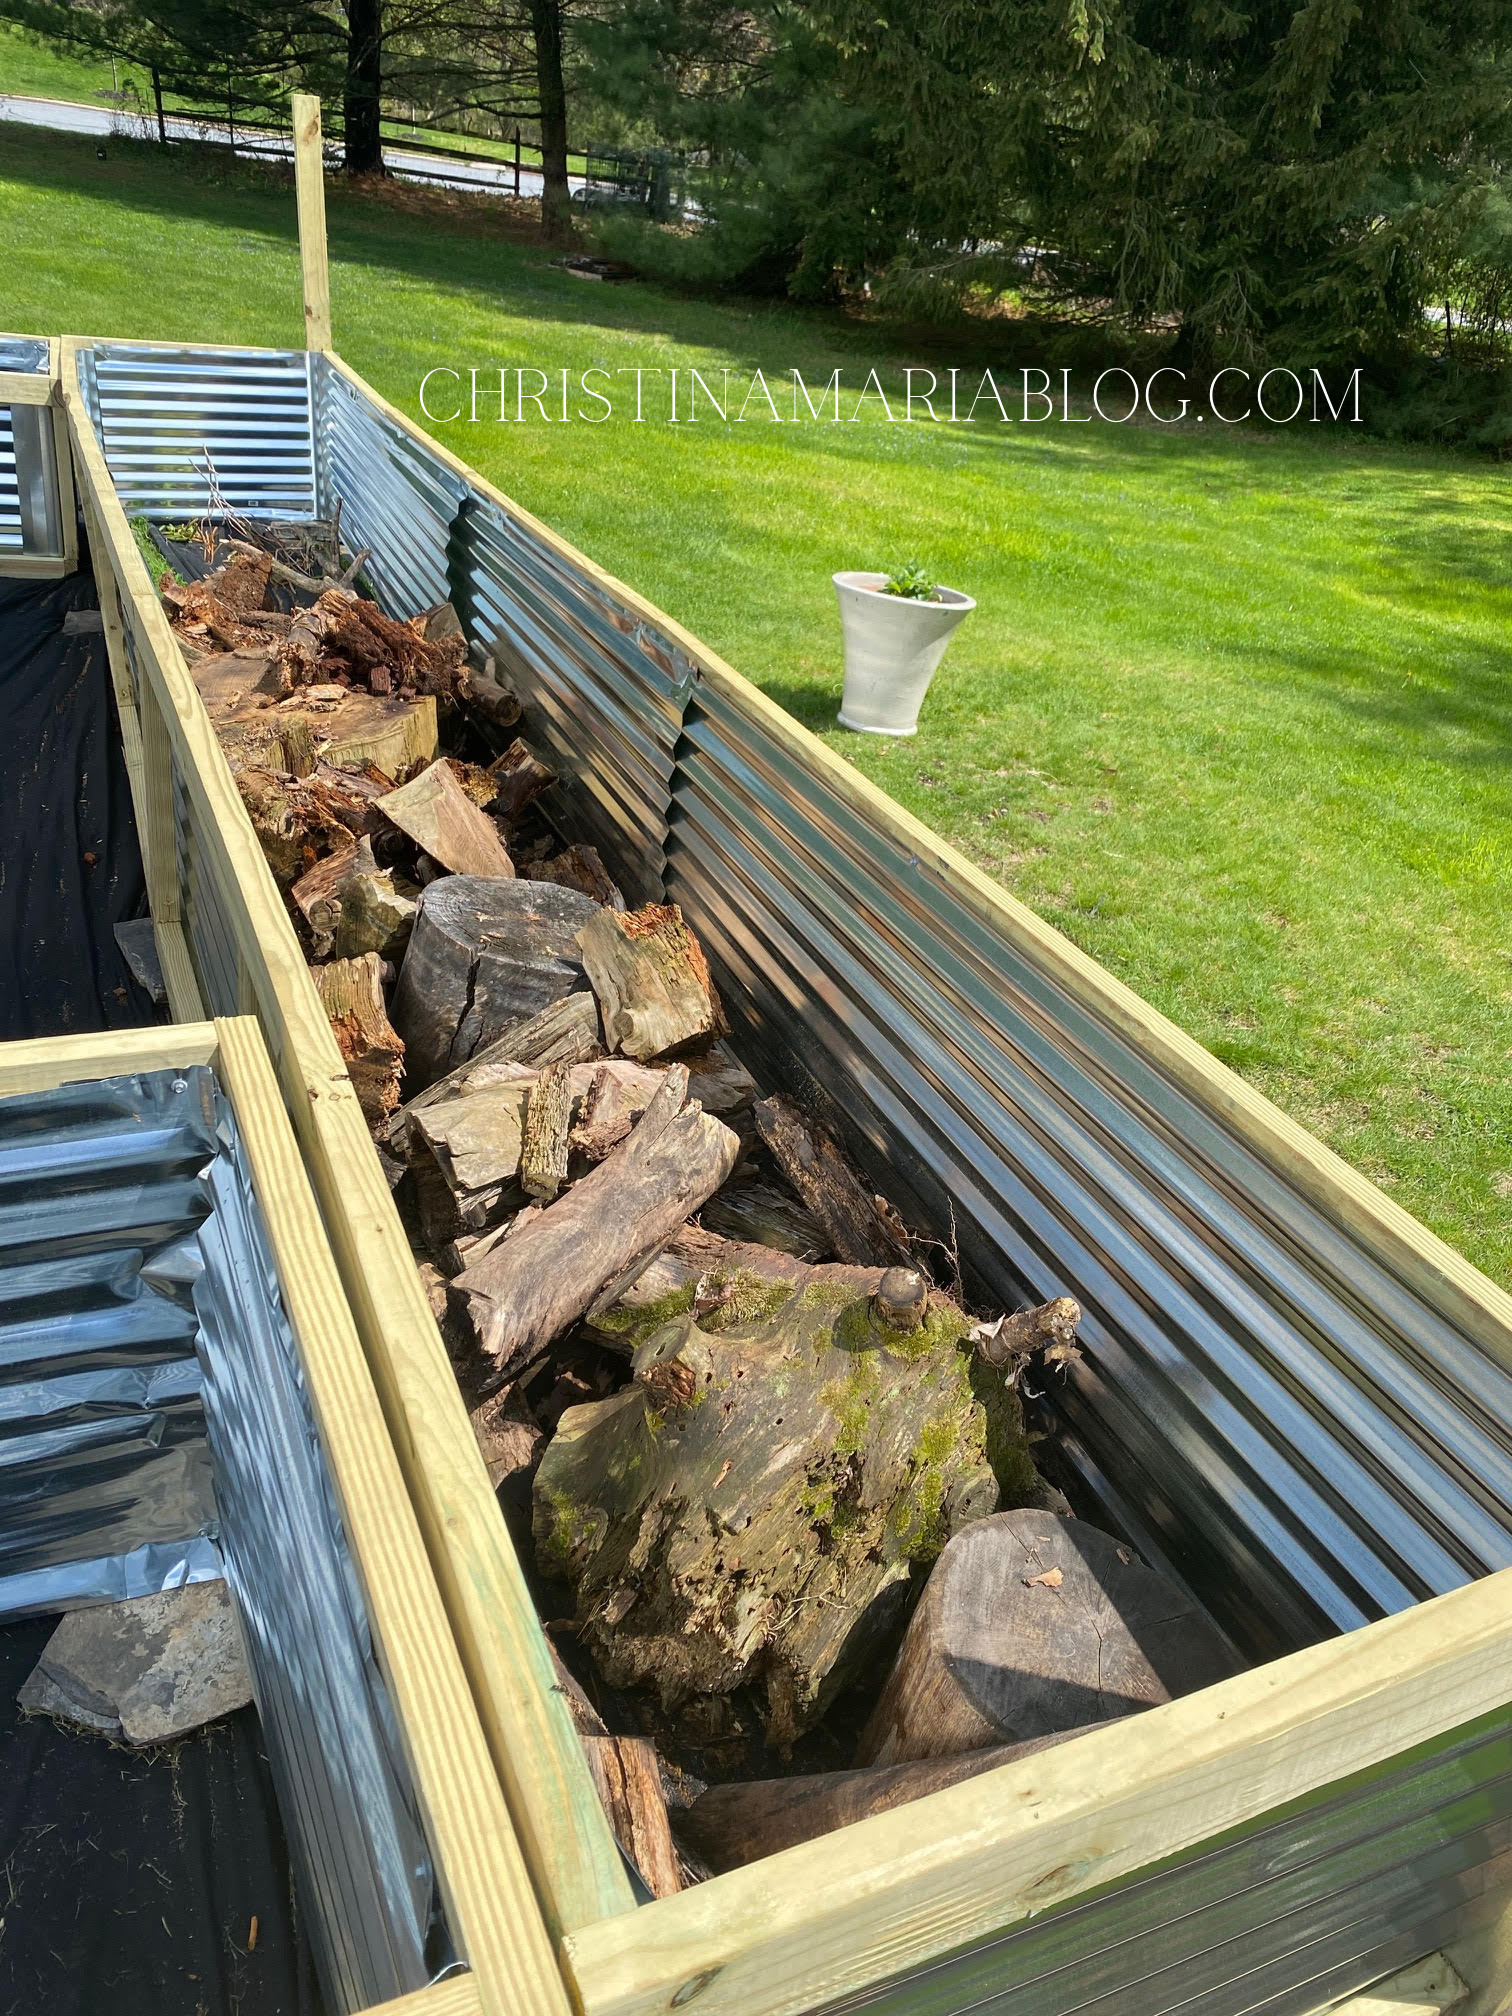 How to fill raised garden beds without spending a lot of money - Christina Maria Blog